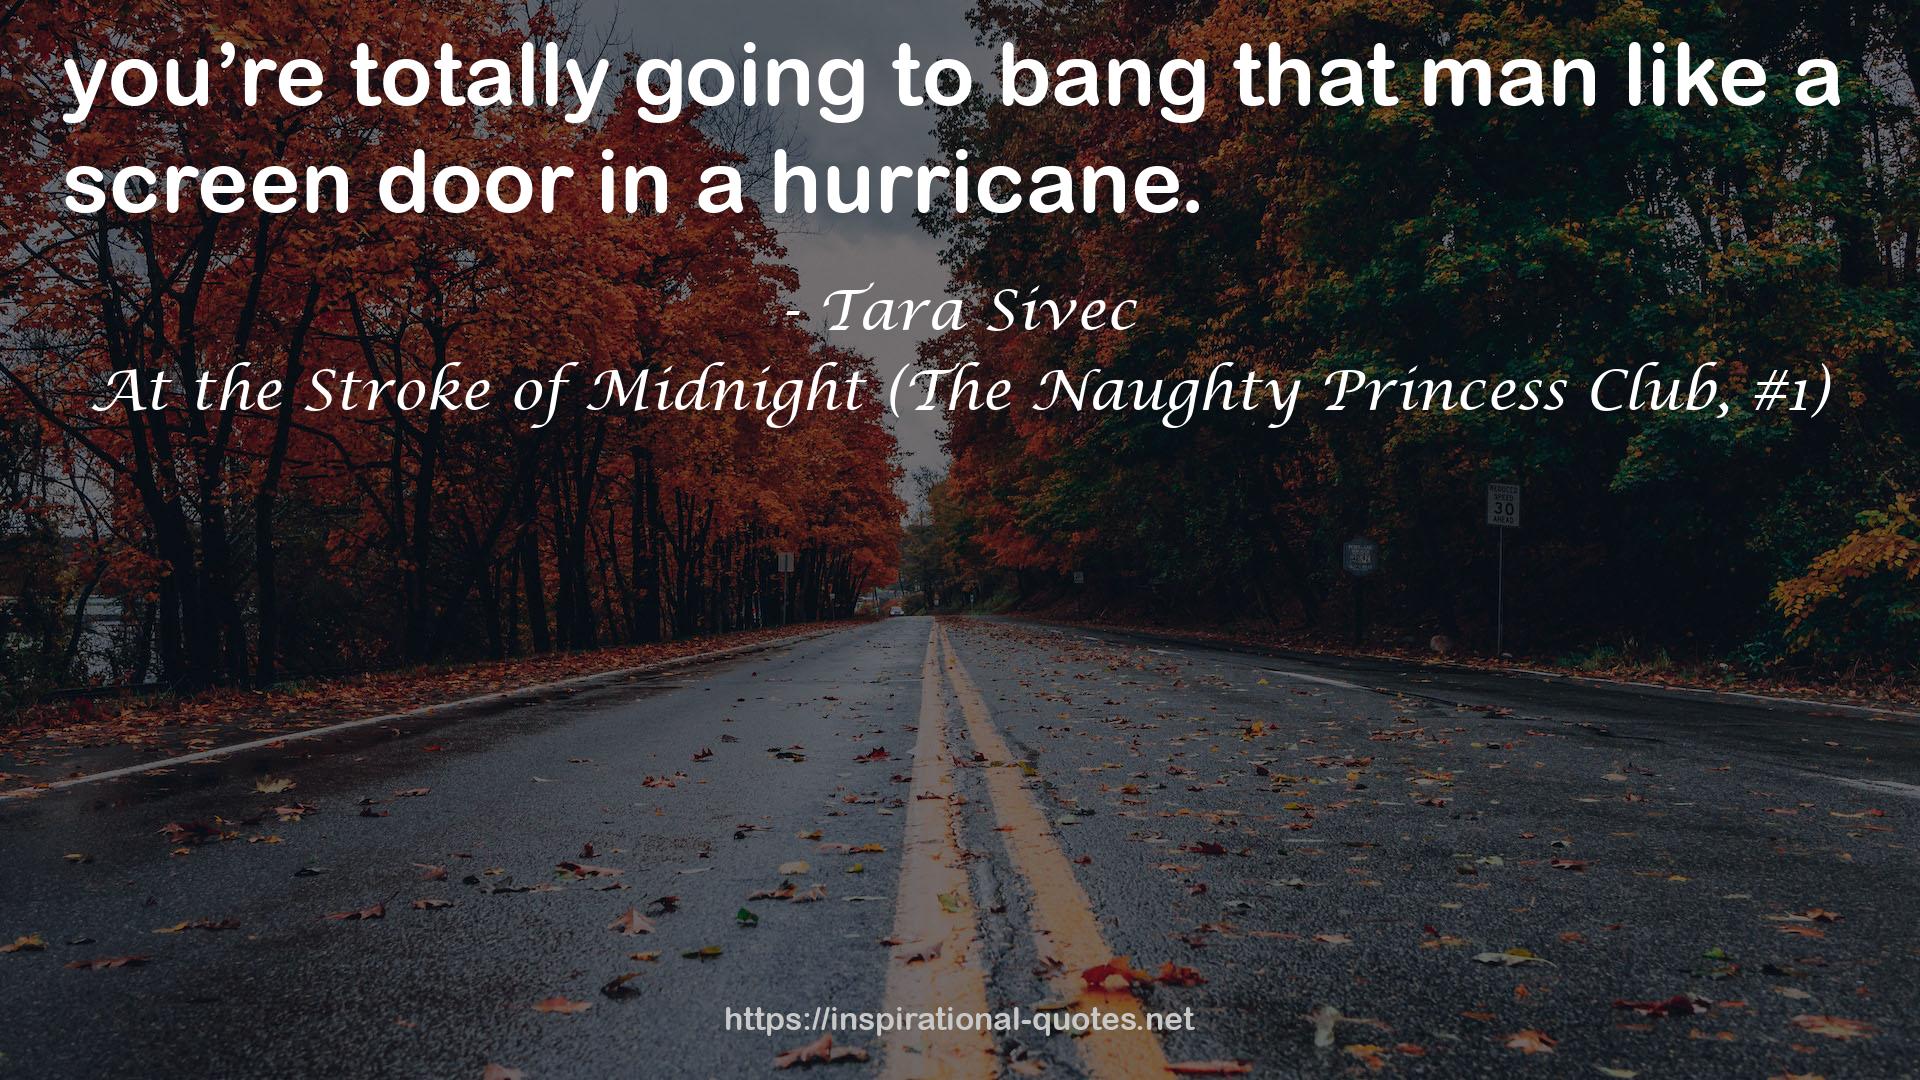 At the Stroke of Midnight (The Naughty Princess Club, #1) QUOTES